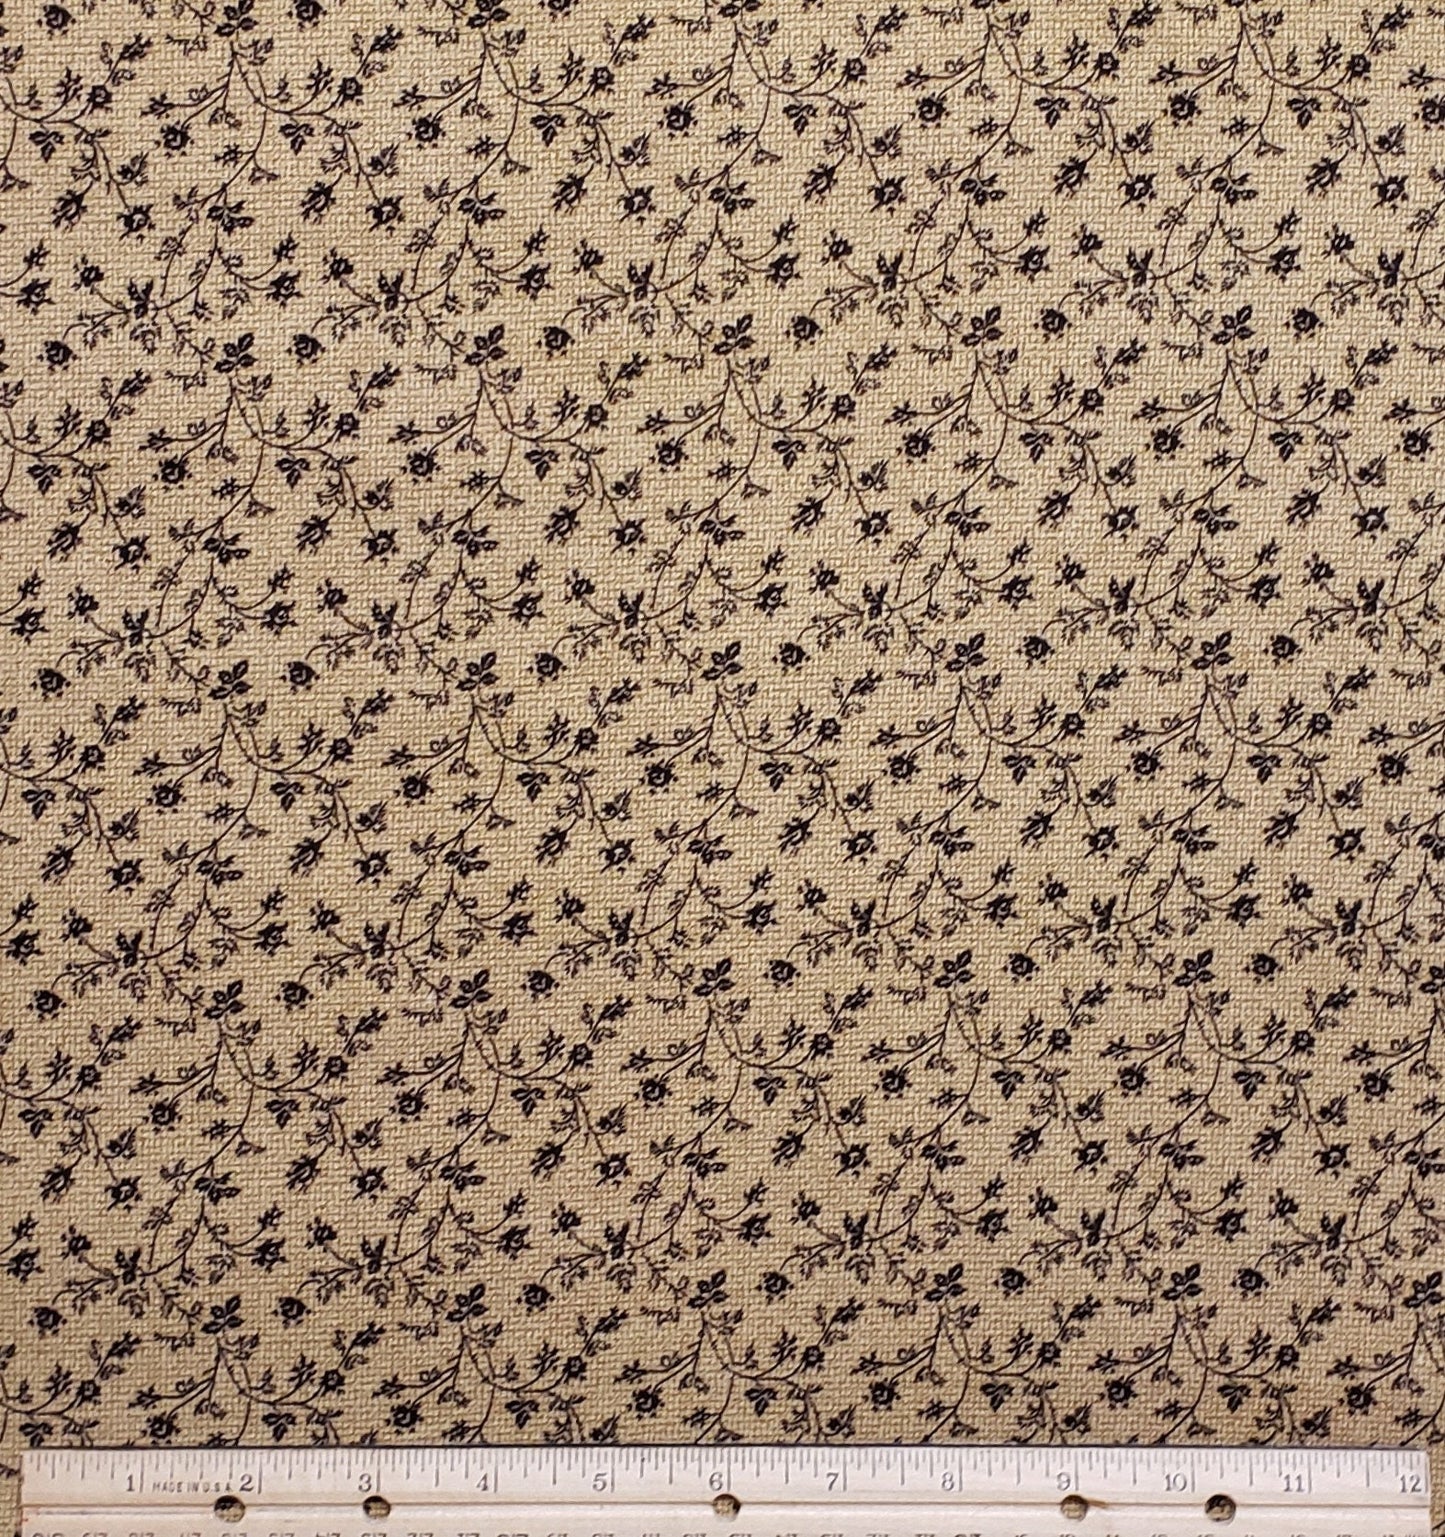 Baum Textile, Inc. - Reproduction Style Light Brown Fabric with Crosshatch Pattern Background / Dark Brown Leaf and Vine Pattern